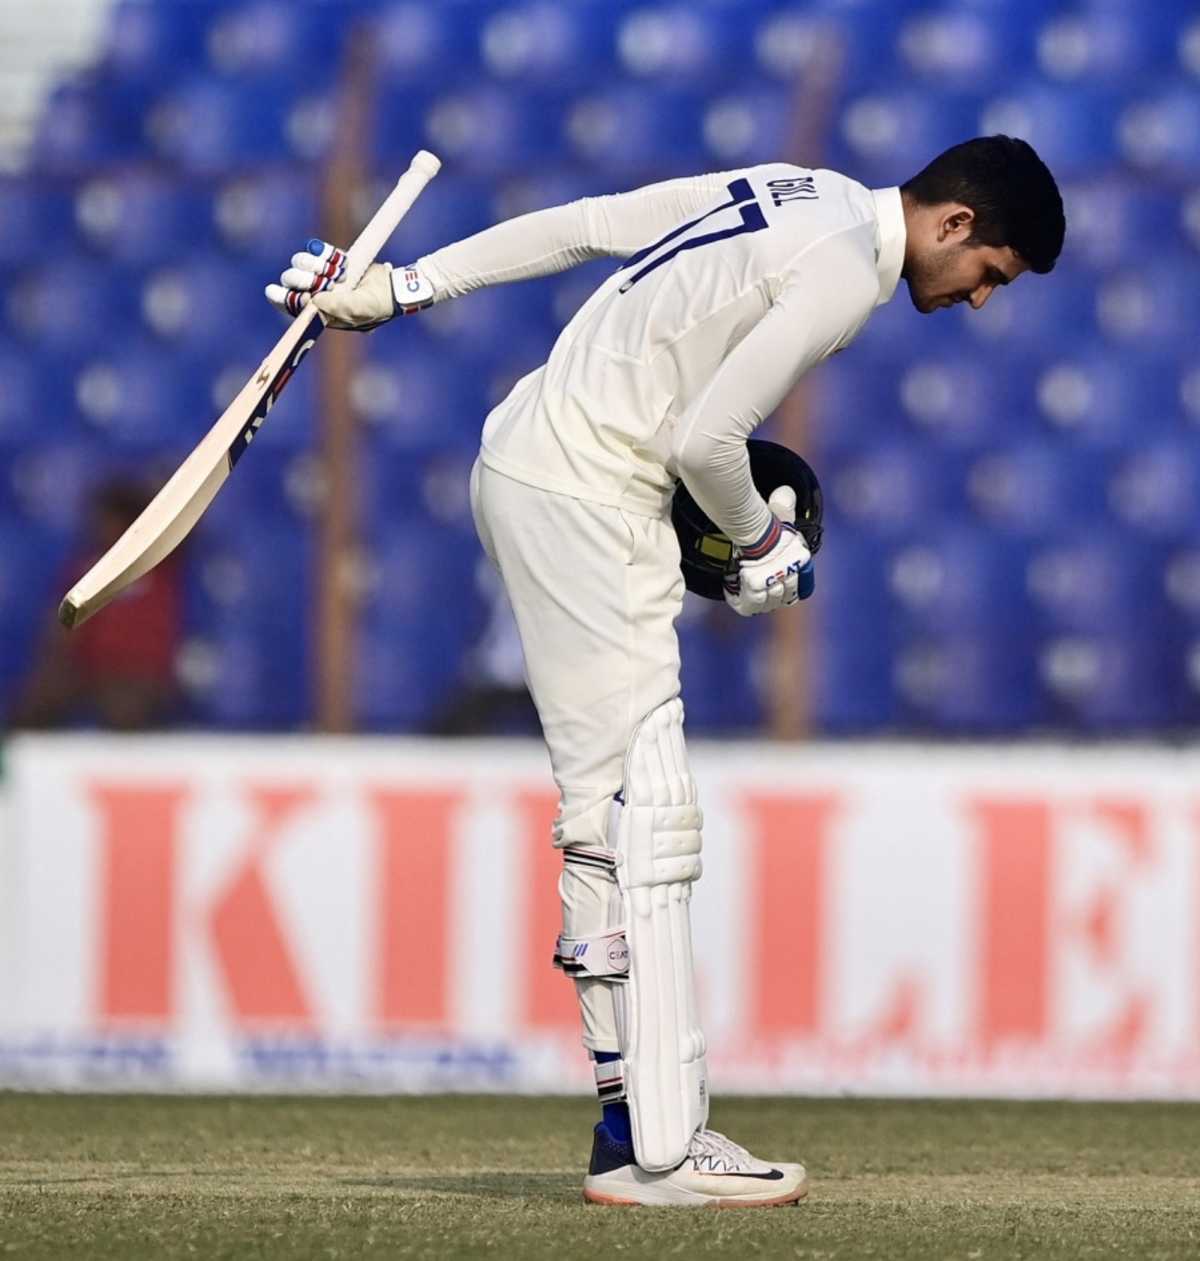 Shubman Gill bows in celebration after his maiden Test ton, Bangladesh vs India, 1st Test, Chattogram, 3rd day, December 16, 2022